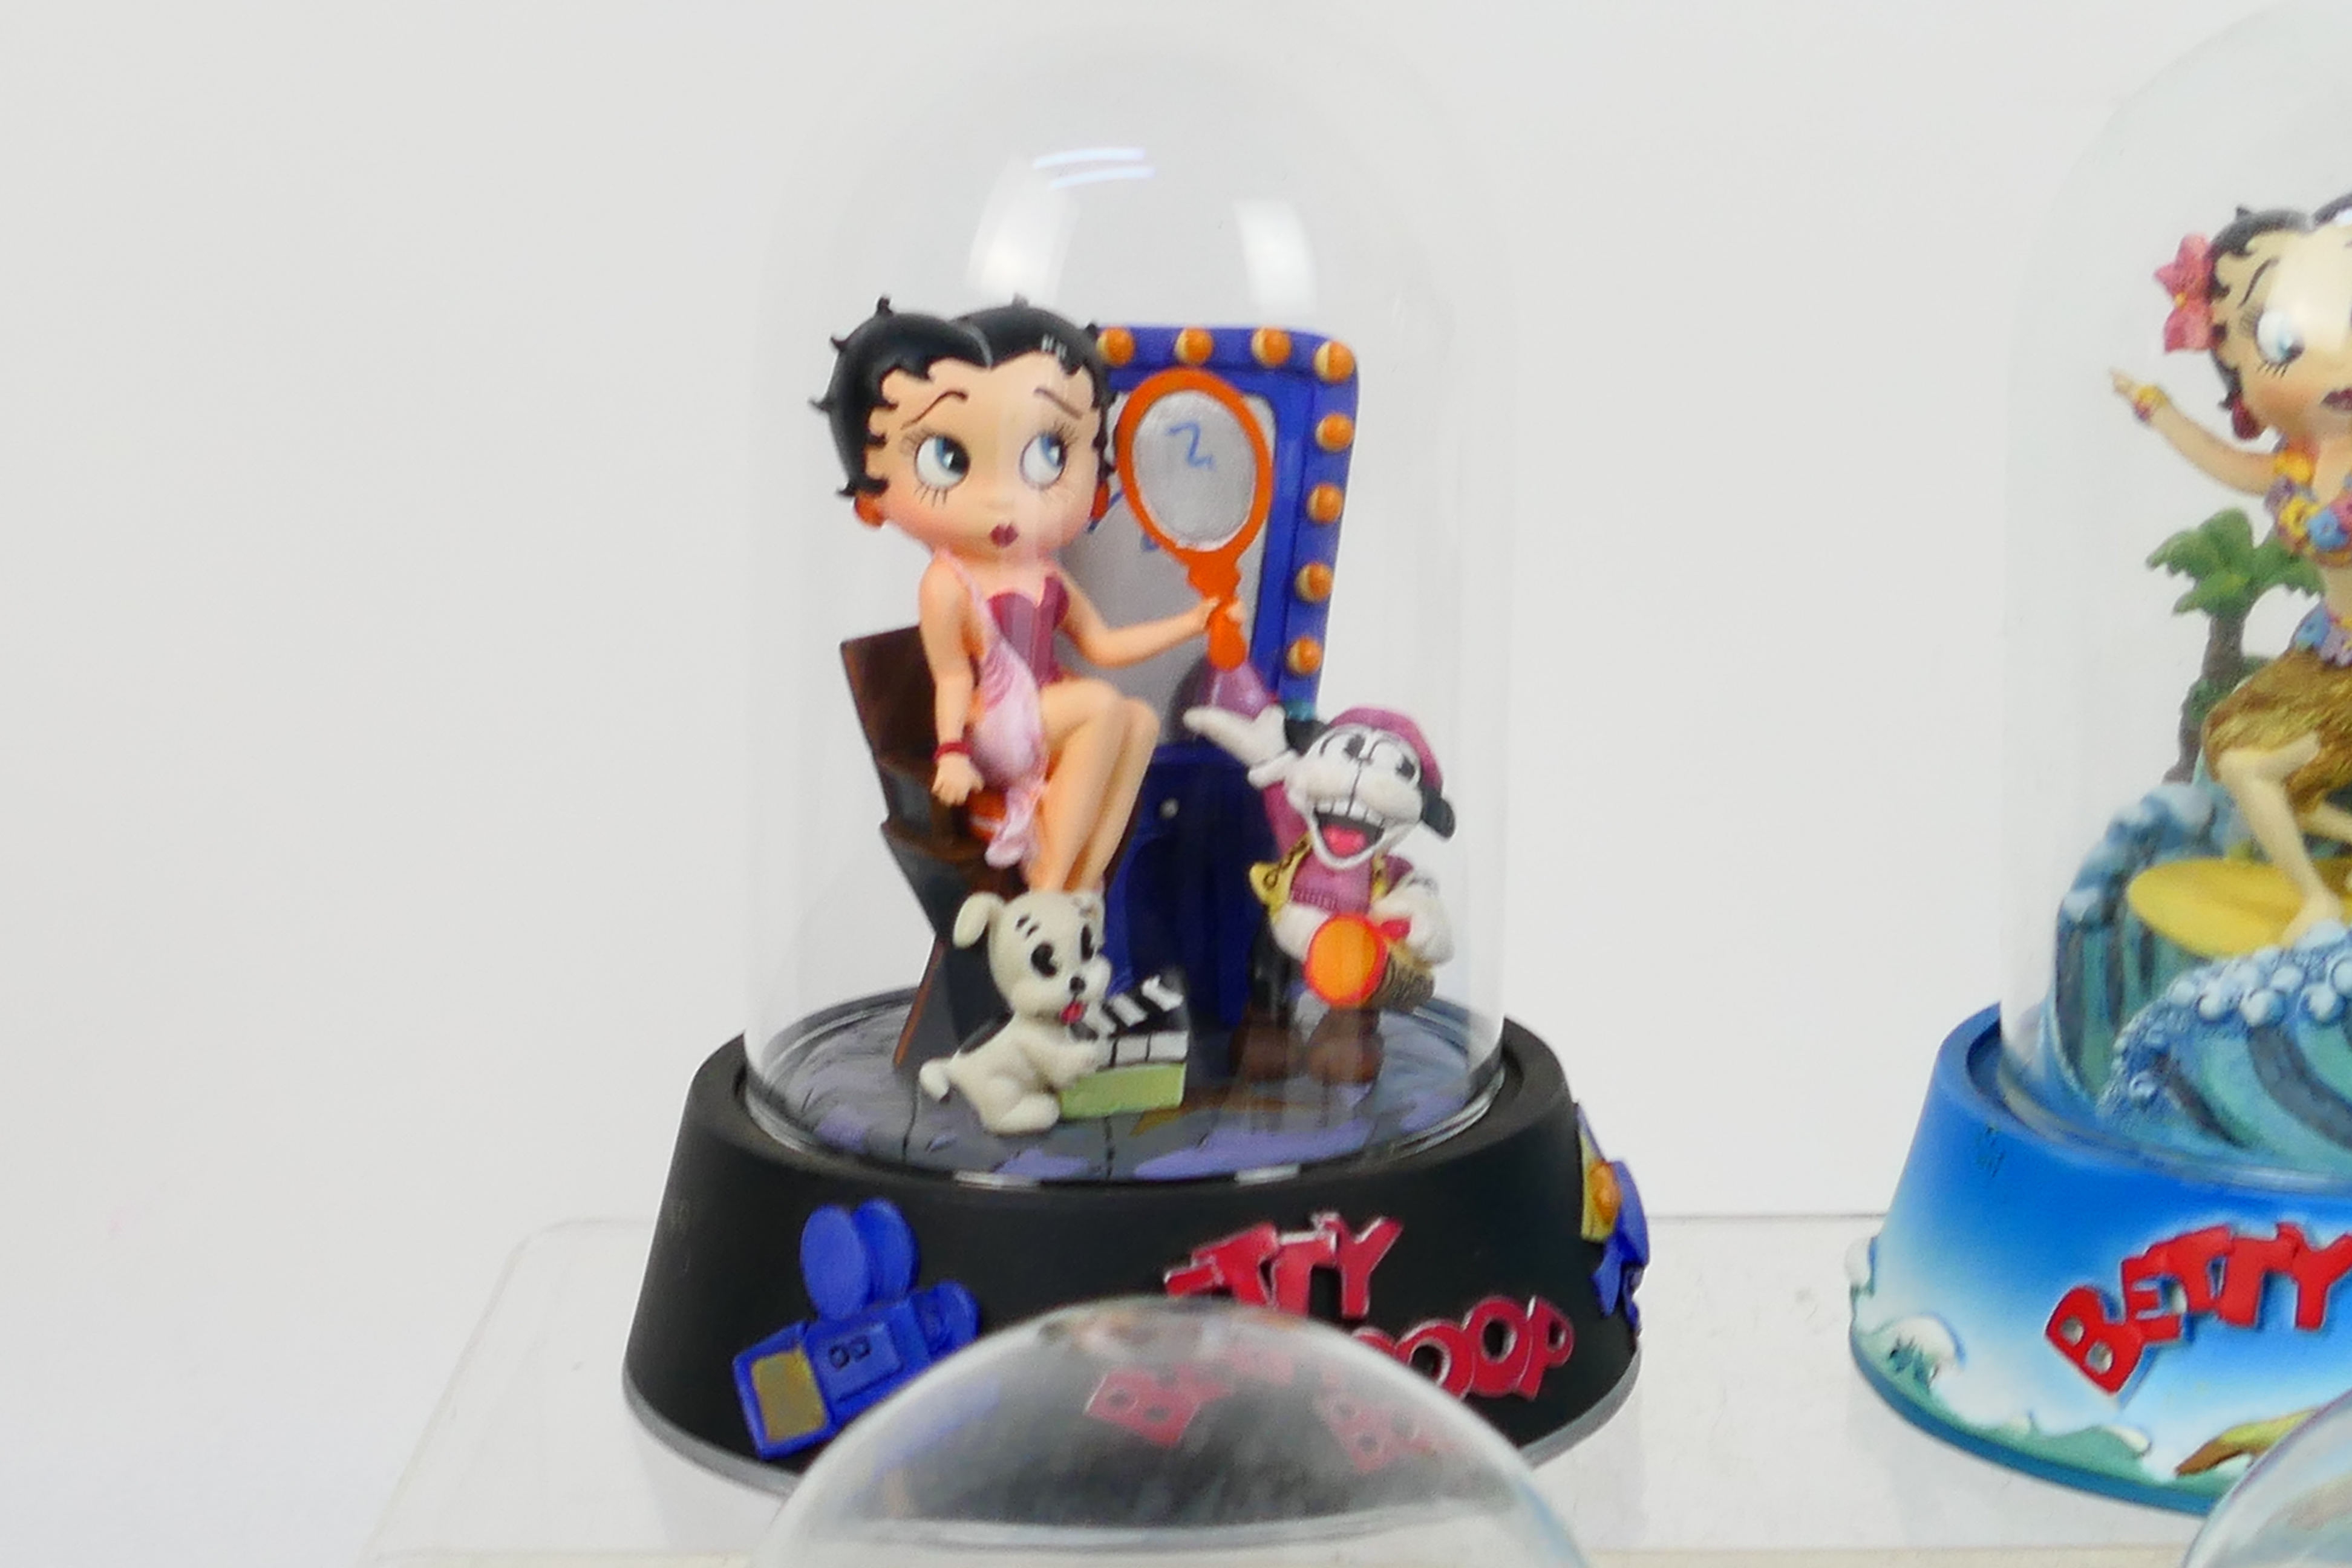 Betty Boop limited edition hand painted sculptures housed under glass domes to include Surfboard - Image 2 of 5